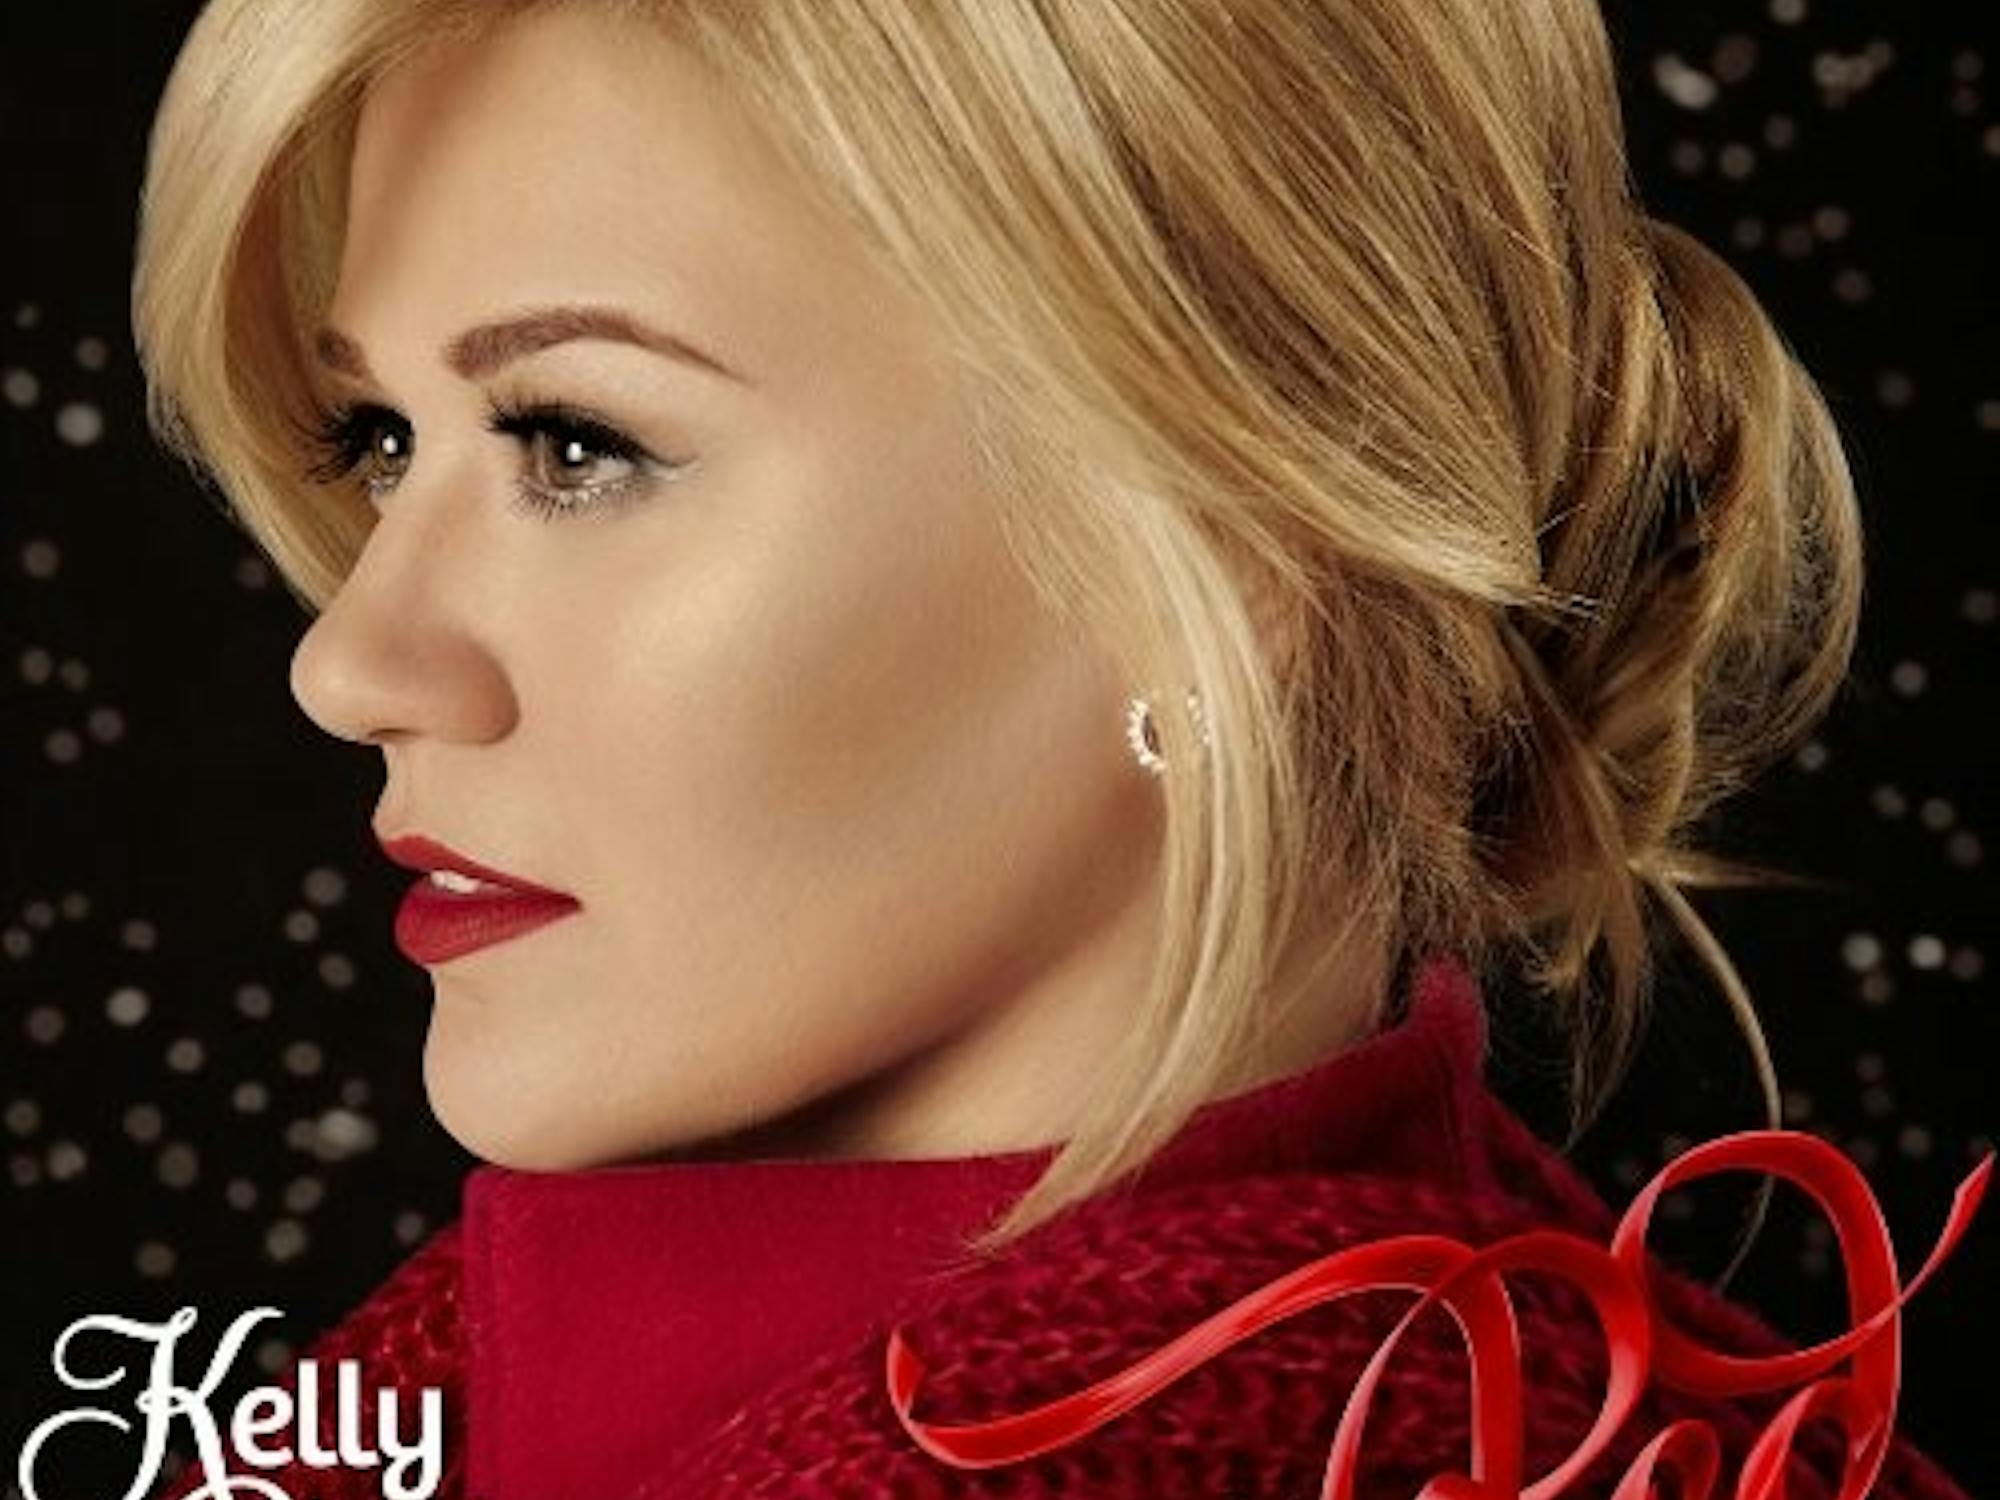 	Kelly Clarkson’s new album, “Wrapped in Red,” would make for a great stocking stuffer for Christmas music lovers.